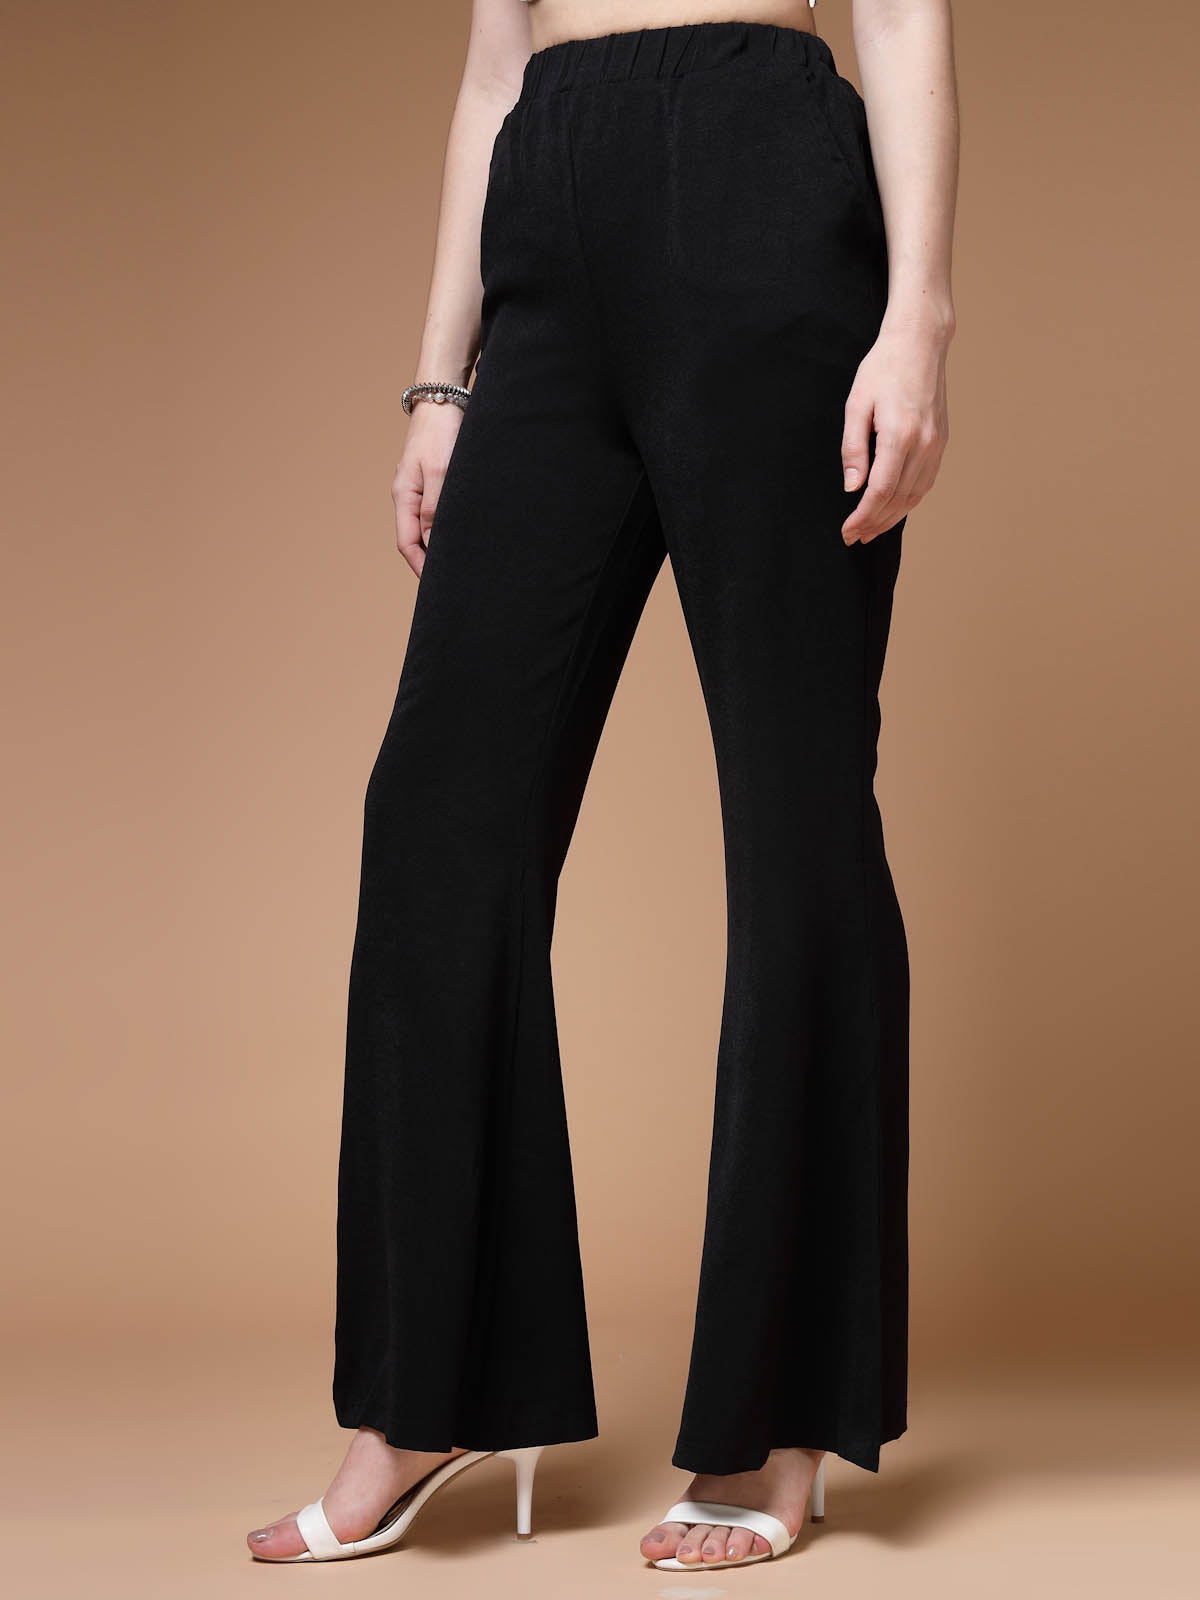 Ask4Fashion Regular Fit Women Black Trousers - Buy Ask4Fashion Regular Fit  Women Black Trousers Online at Best Prices in India | Flipkart.com